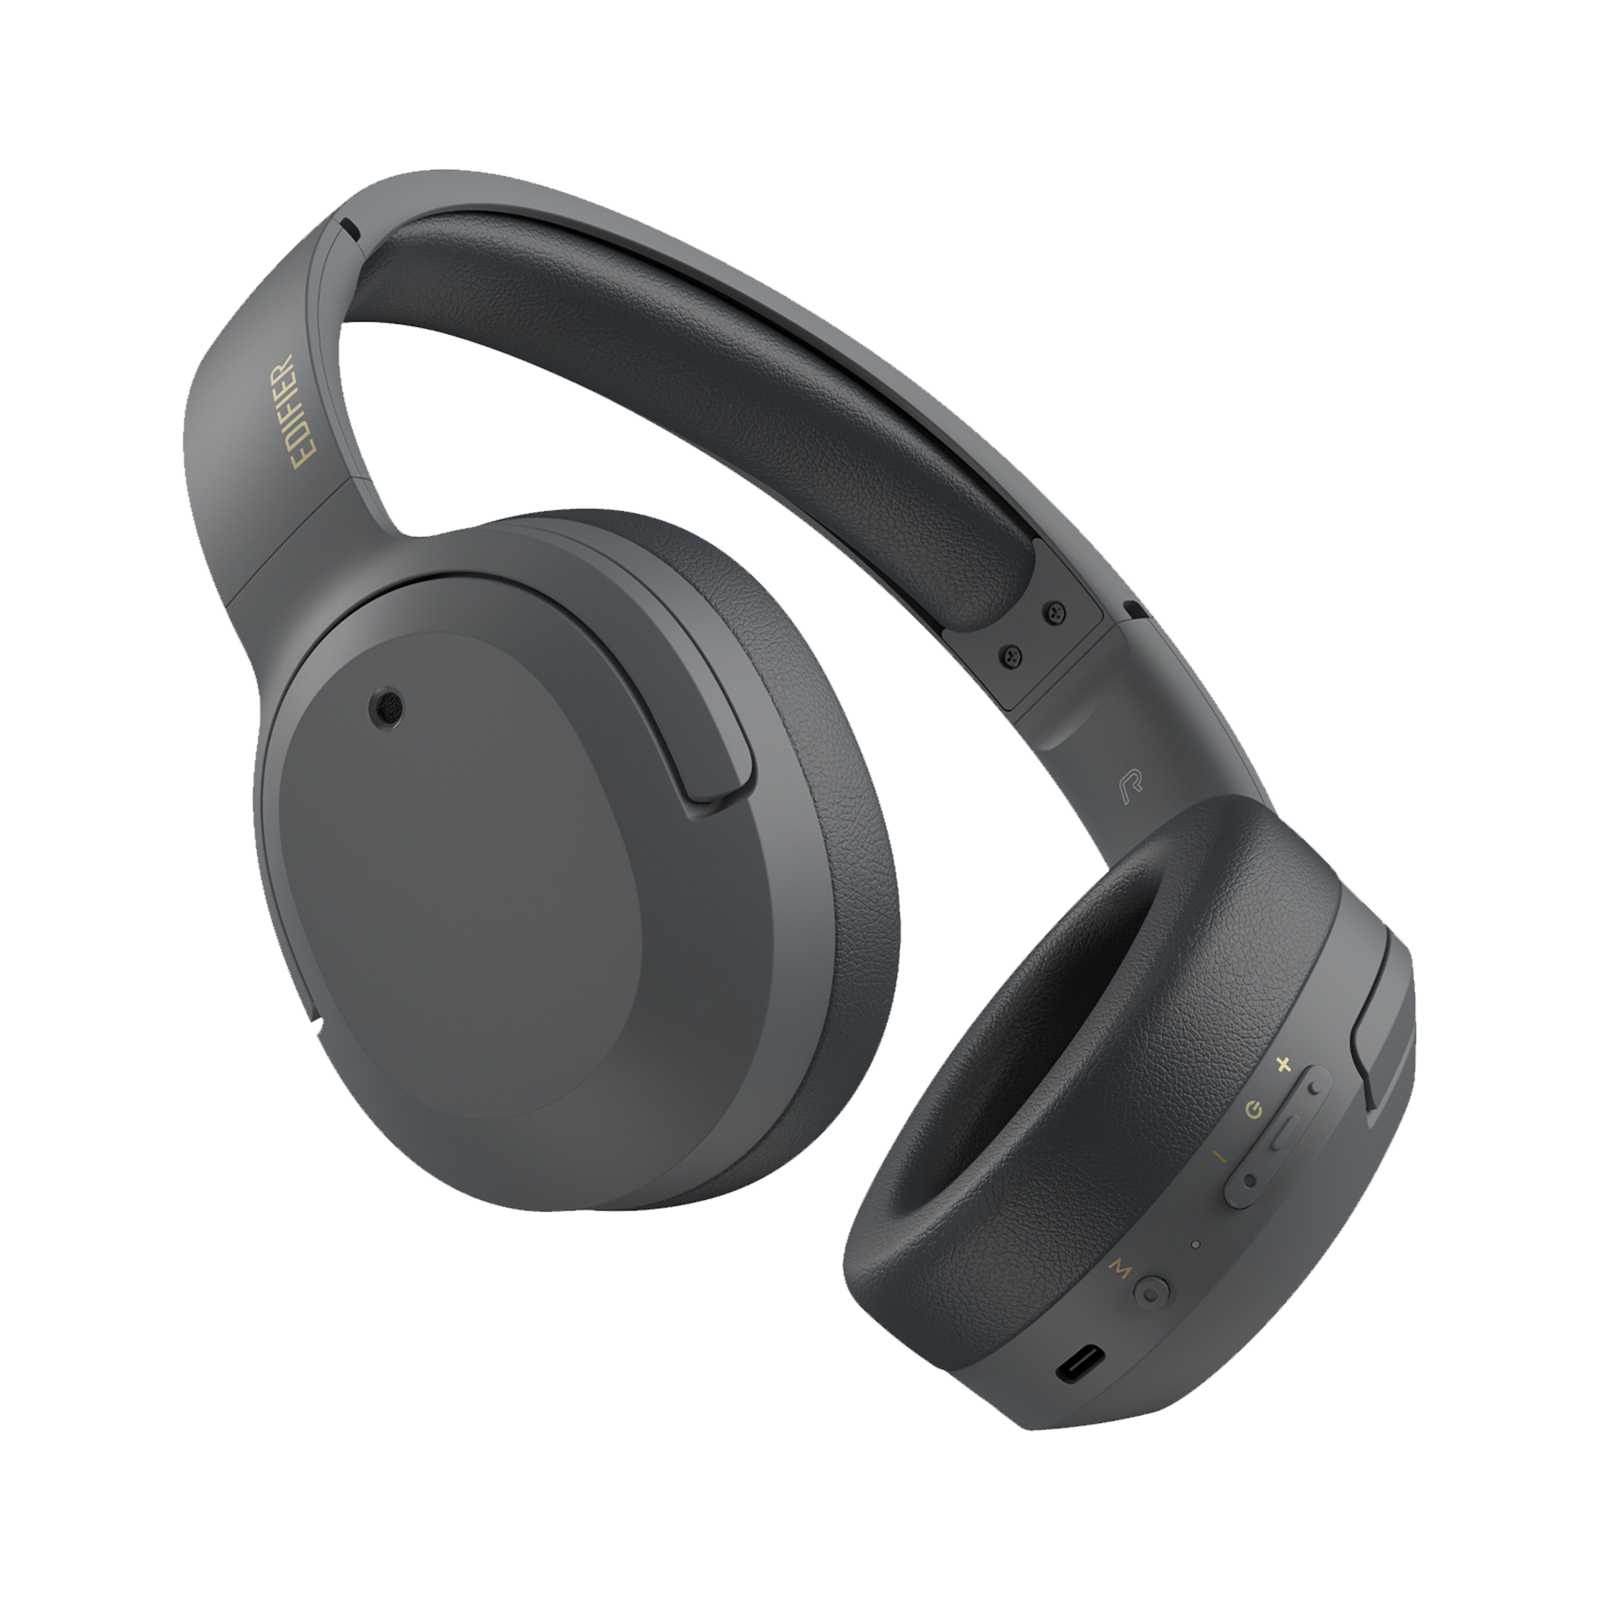 W820NB Plus Wireless Noise Cancellation Over-Ear Headphones